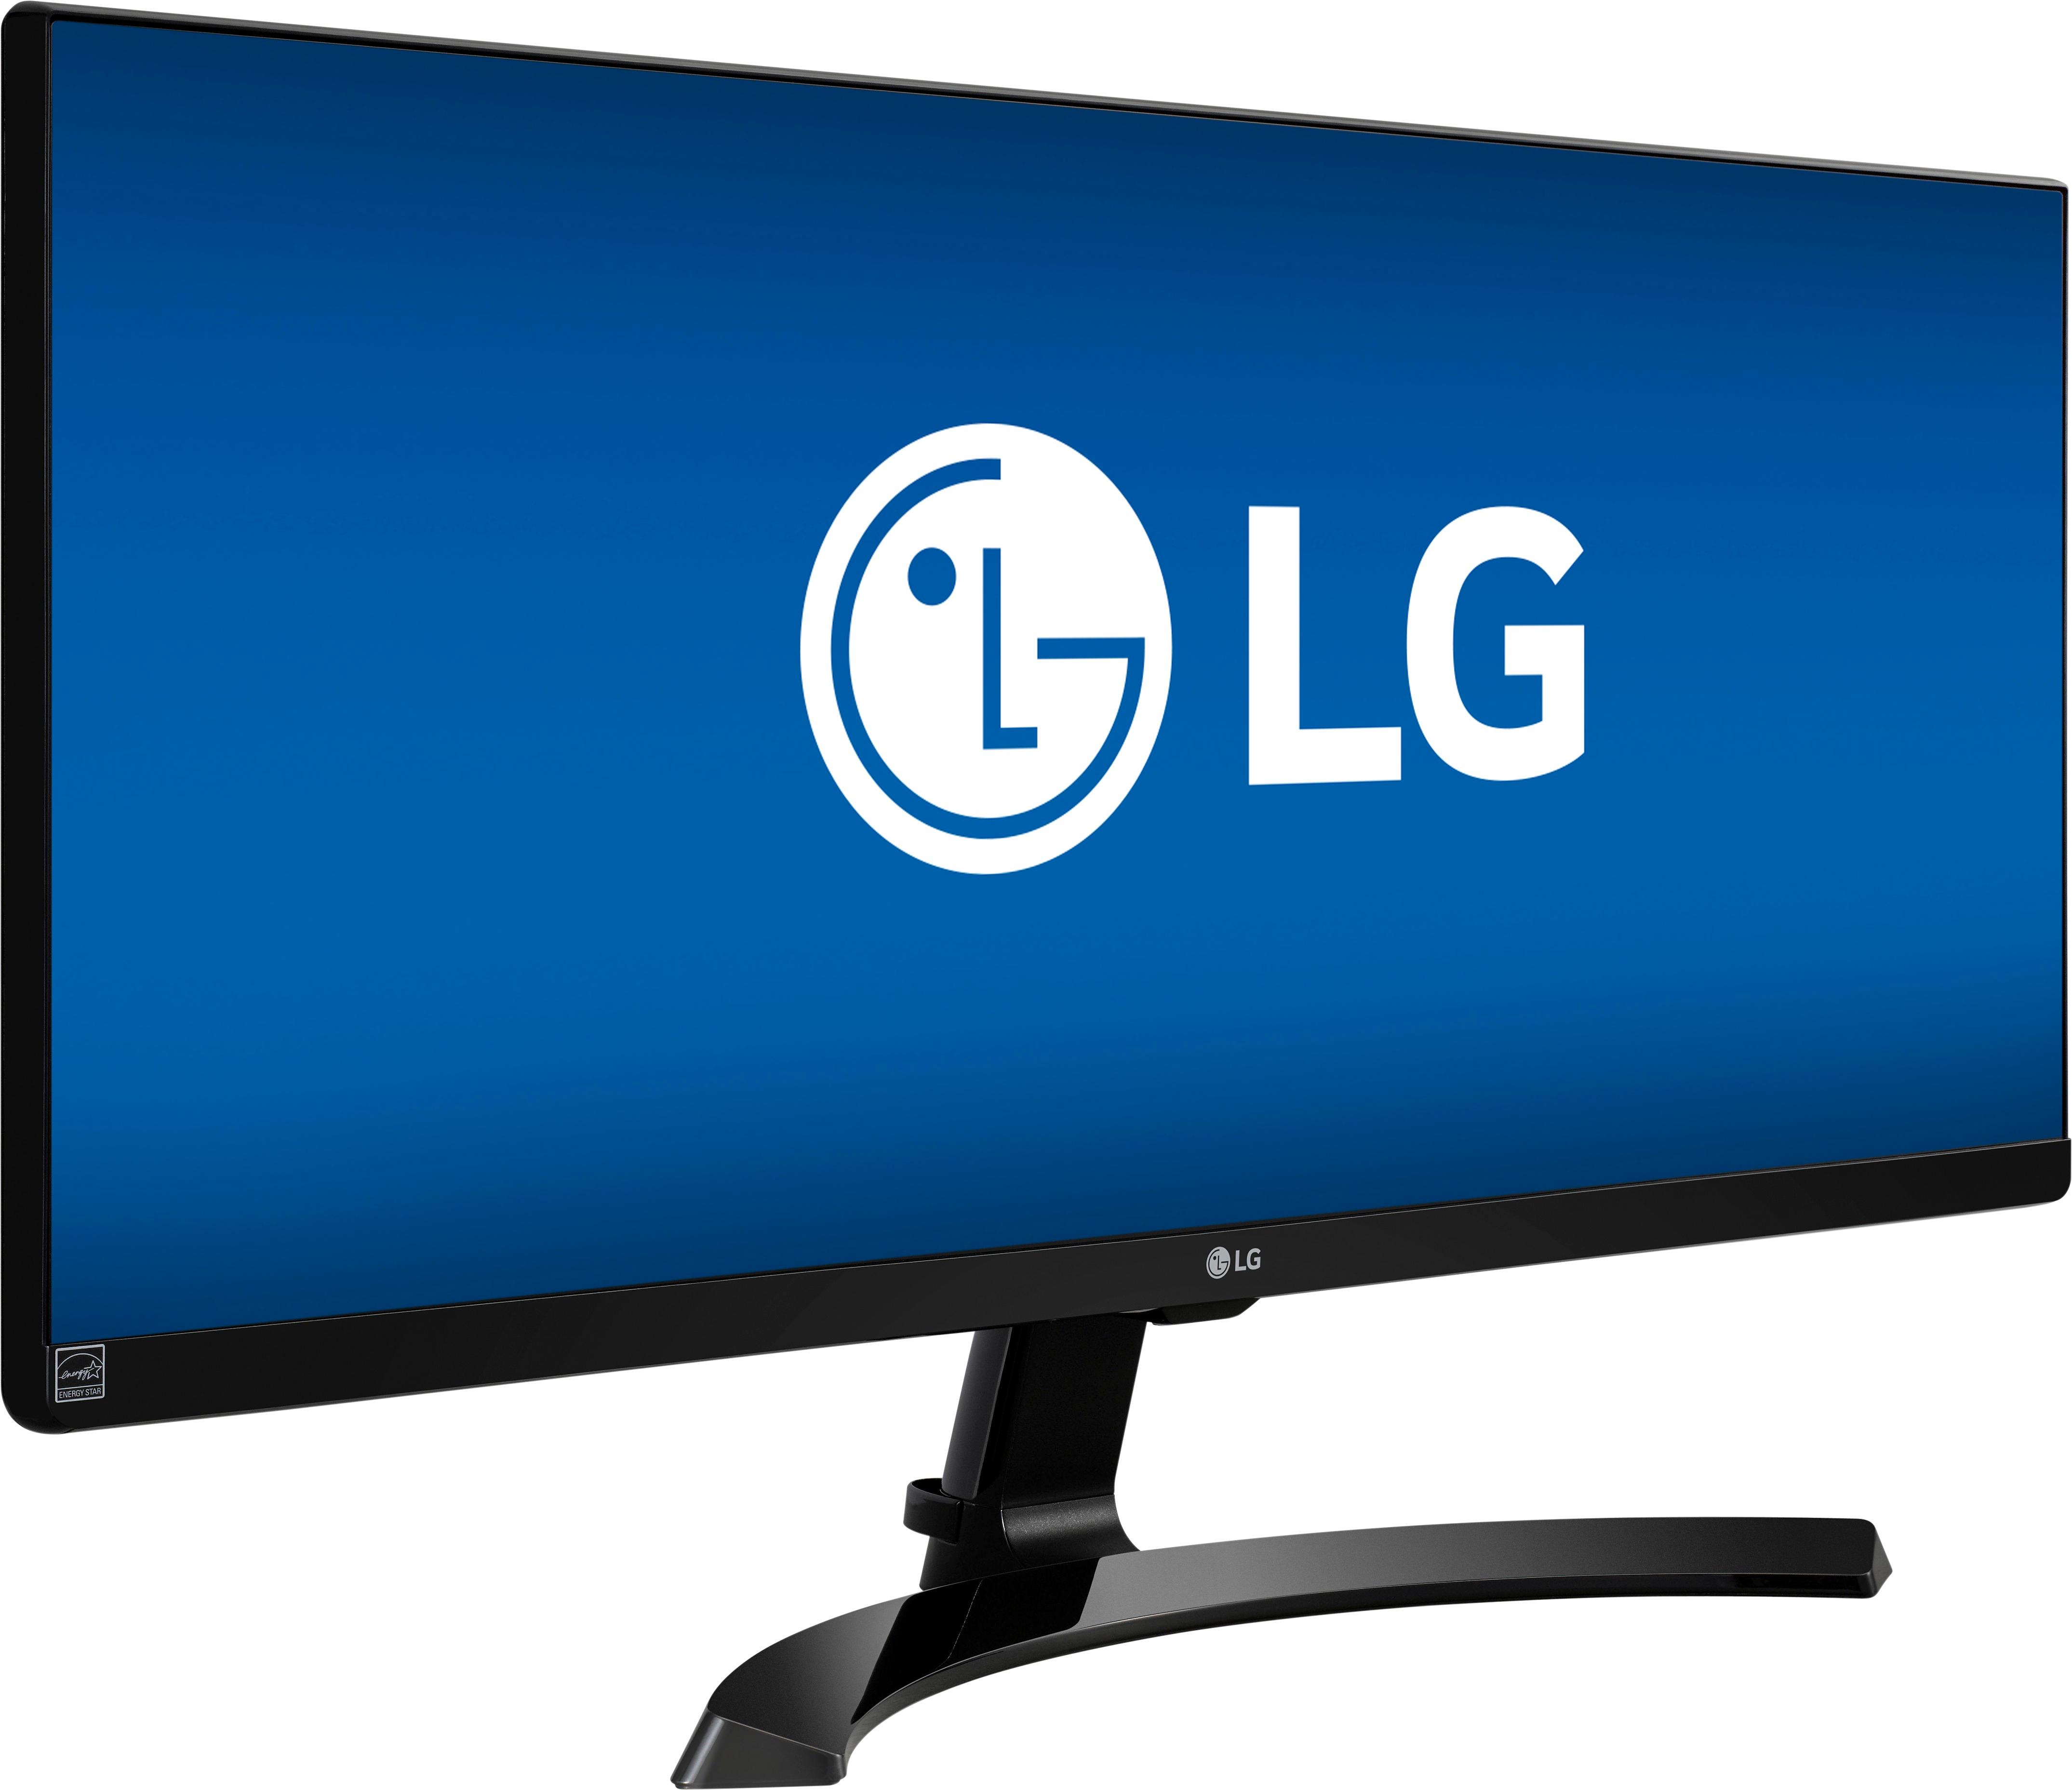  LG UltraWide WFHD 29-Inch FHD 1080p Computer Monitor 29WN600-W,  IPS with HDR 10 Compatibility, Silver : Electronics